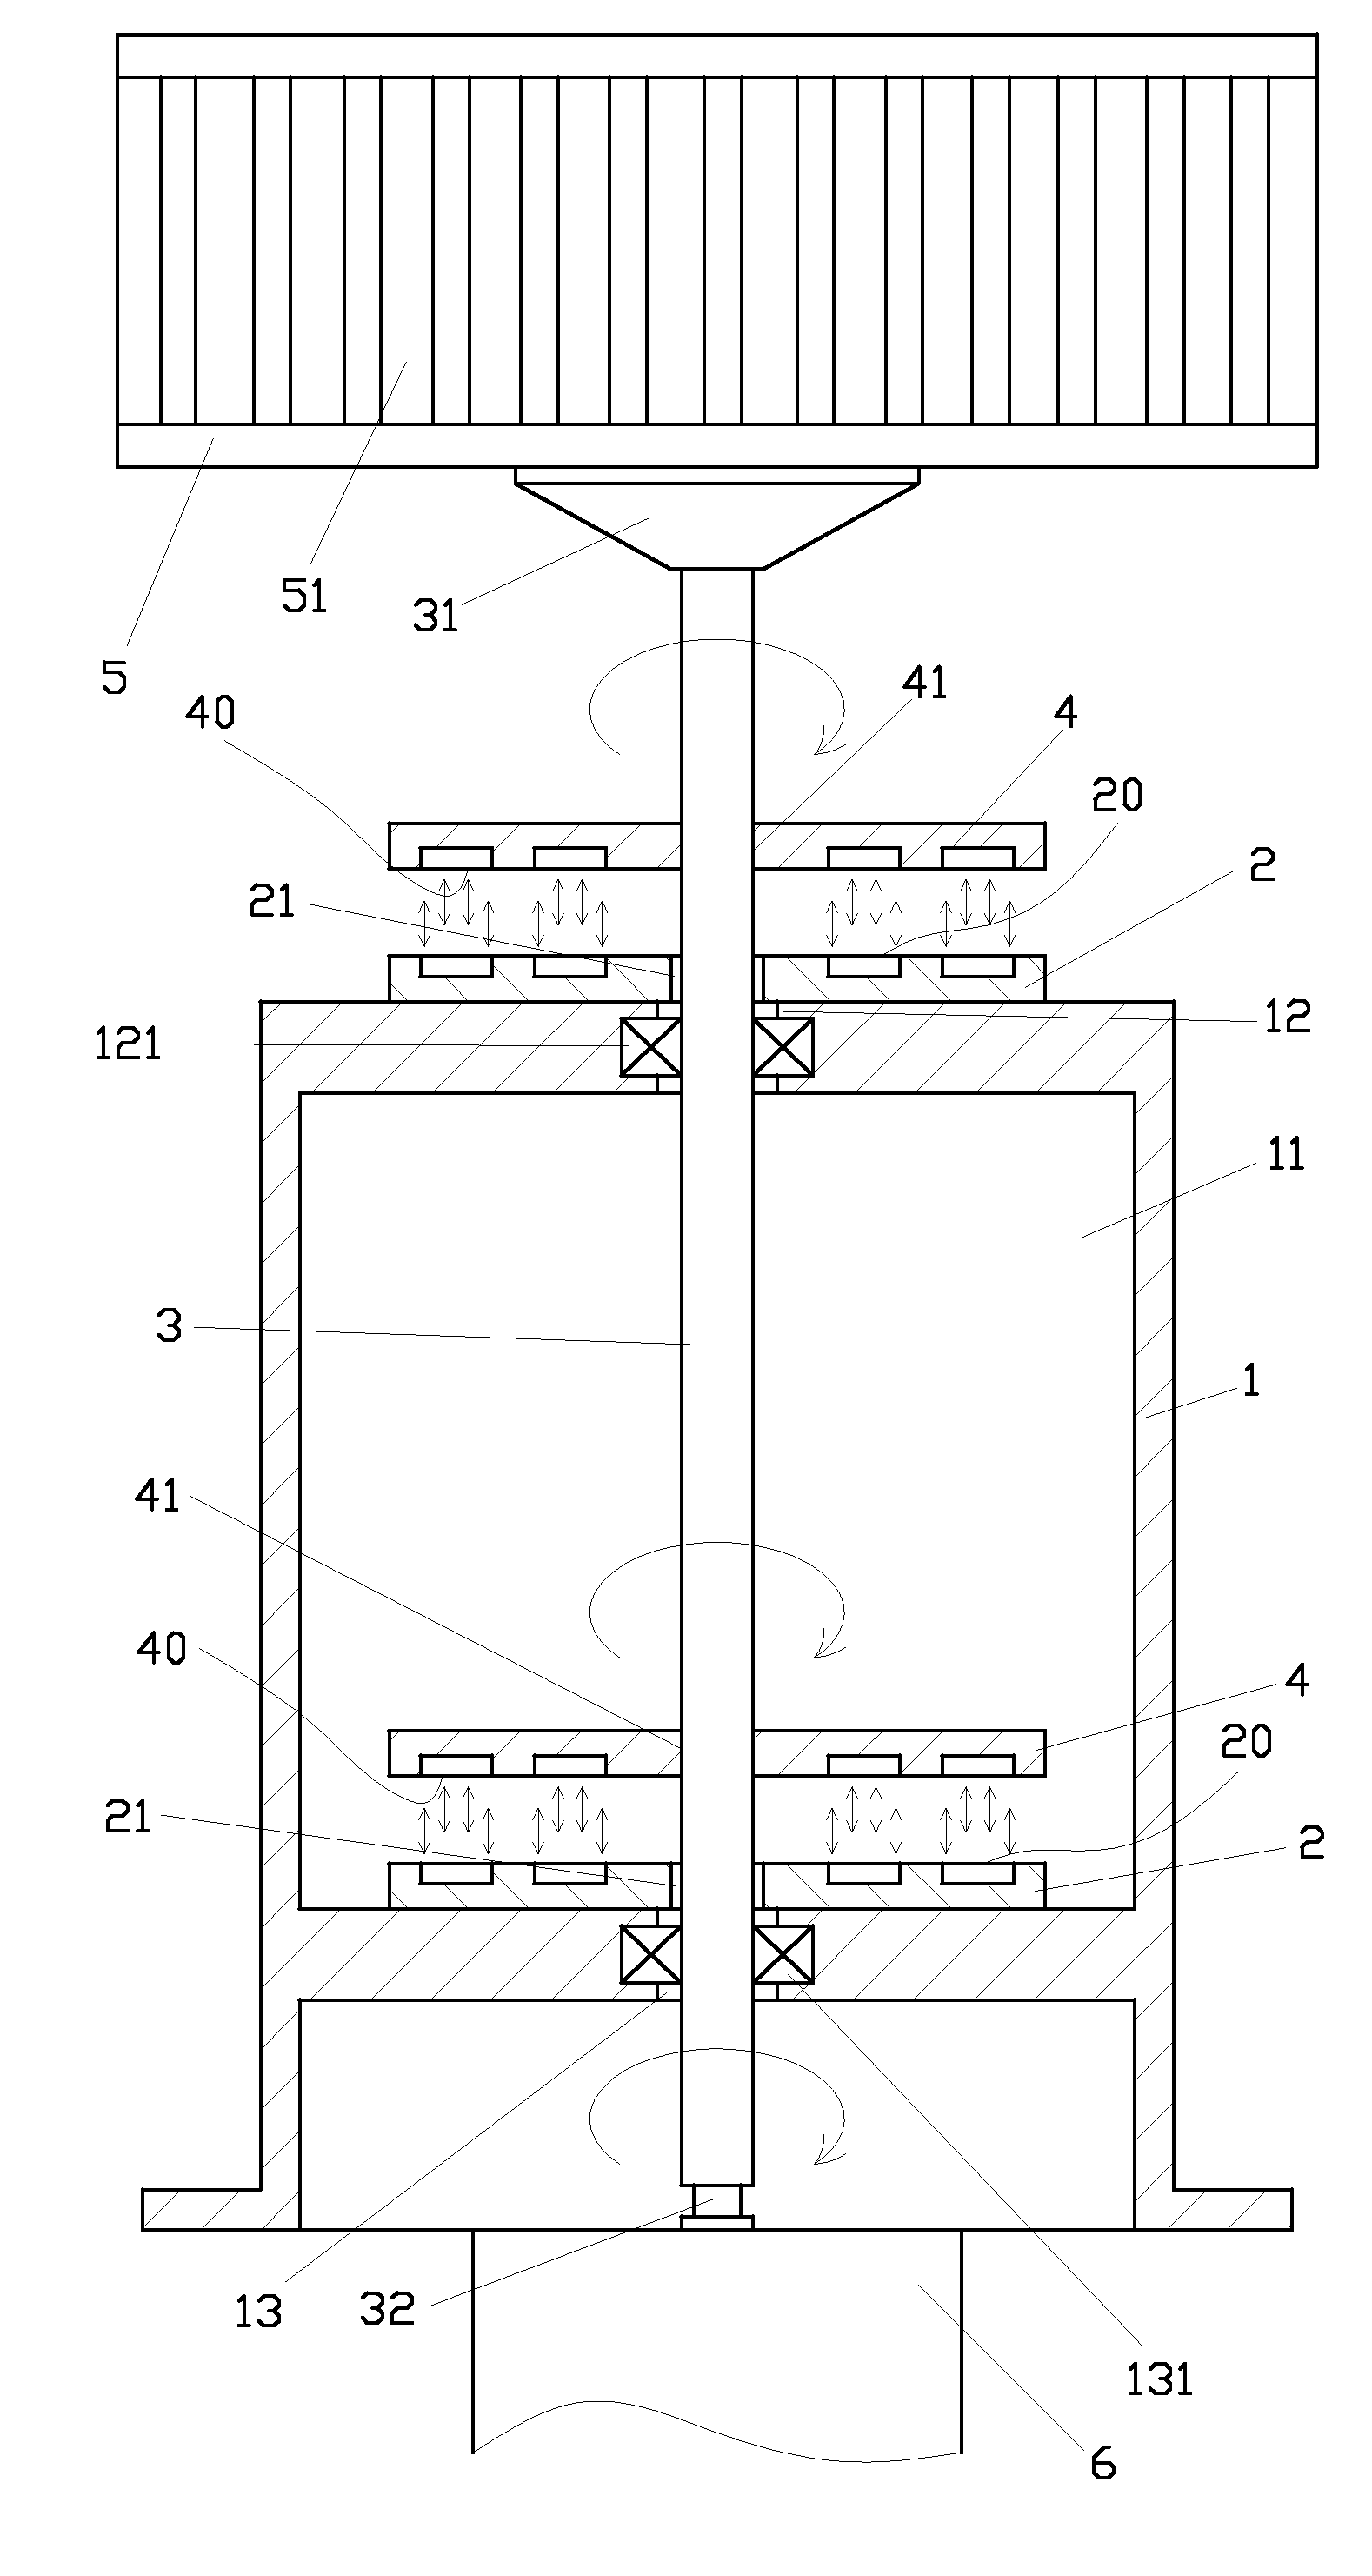 Magnetic Levitation Weight Reduction Structure for a Vertical Wind Turbine Generator